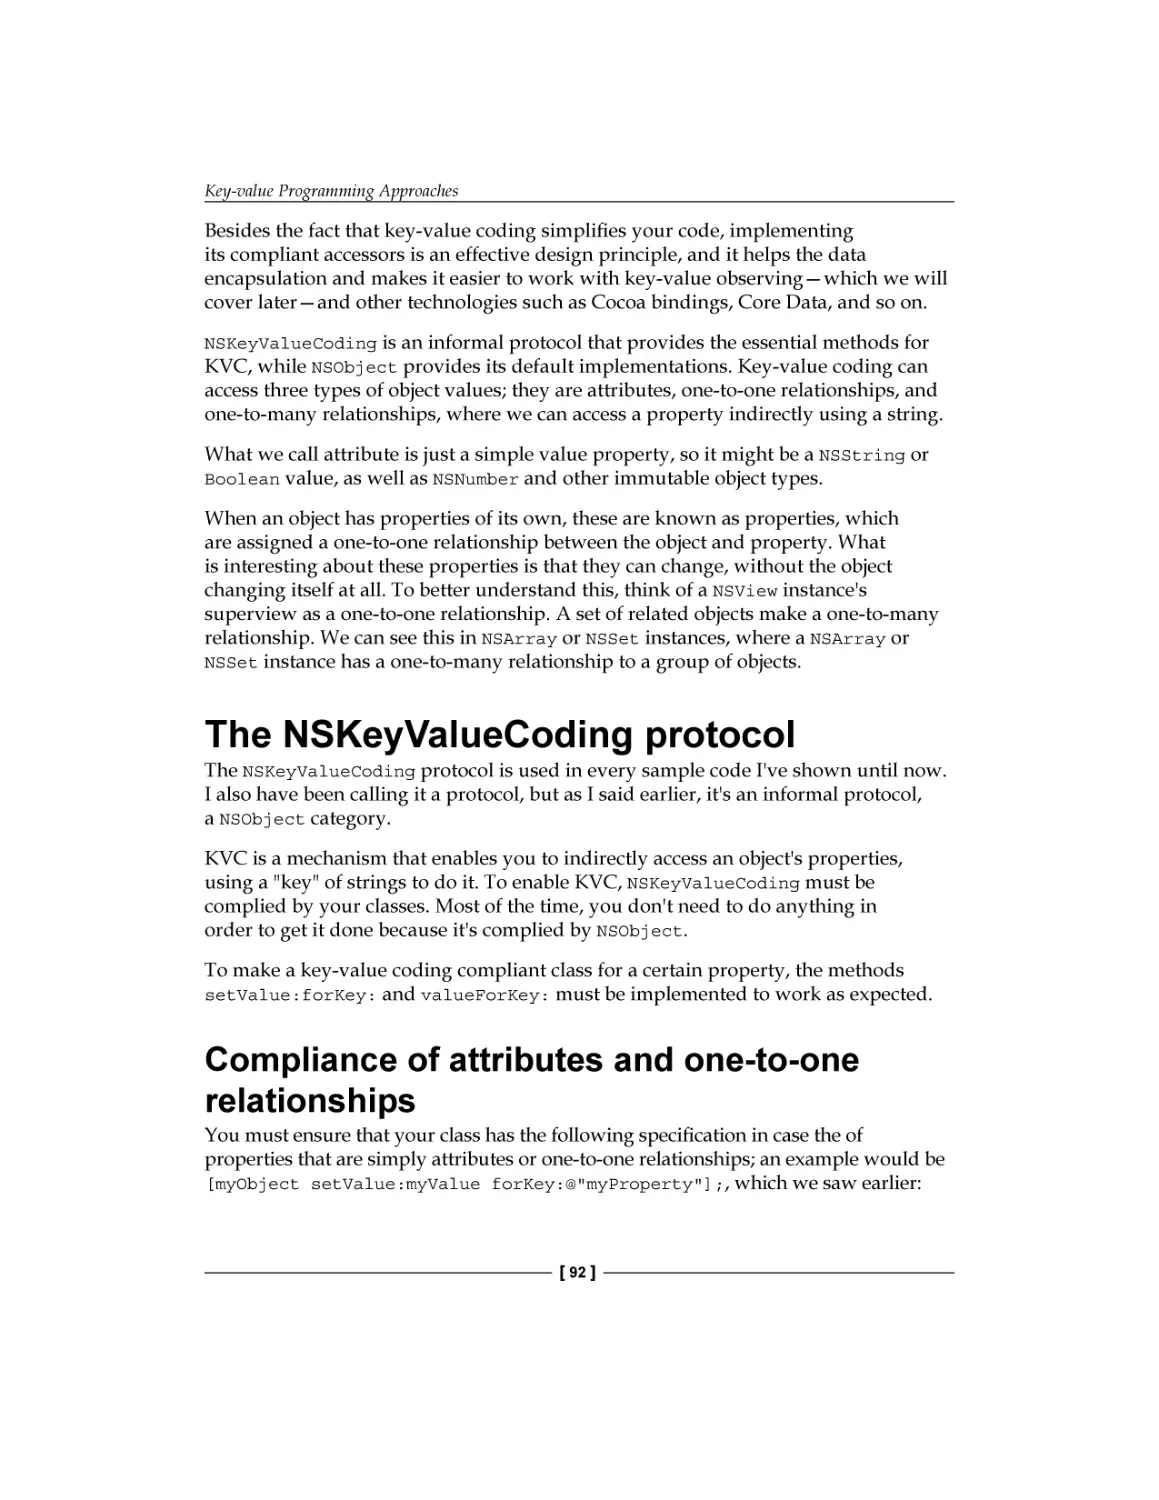 The NSKeyValueCoding protocol
Compliance of attributes and one-to-one relationships